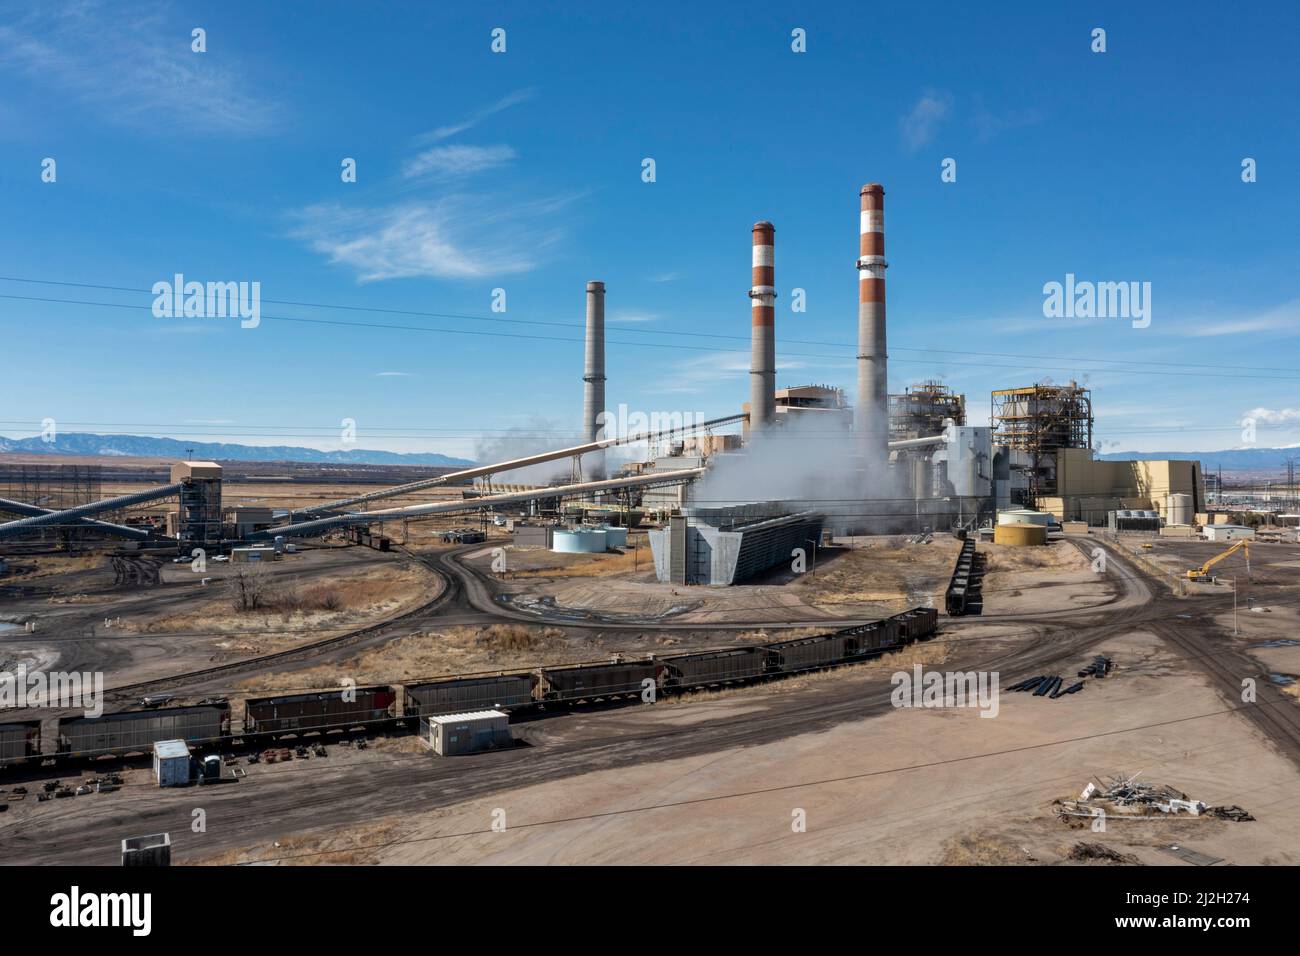 Pueblo, Colorado - The Comanche Generating Station, a coal-fired power plant owned by Xcel Energy. It costs the company $46.32 per megawatt hour of el Stock Photo